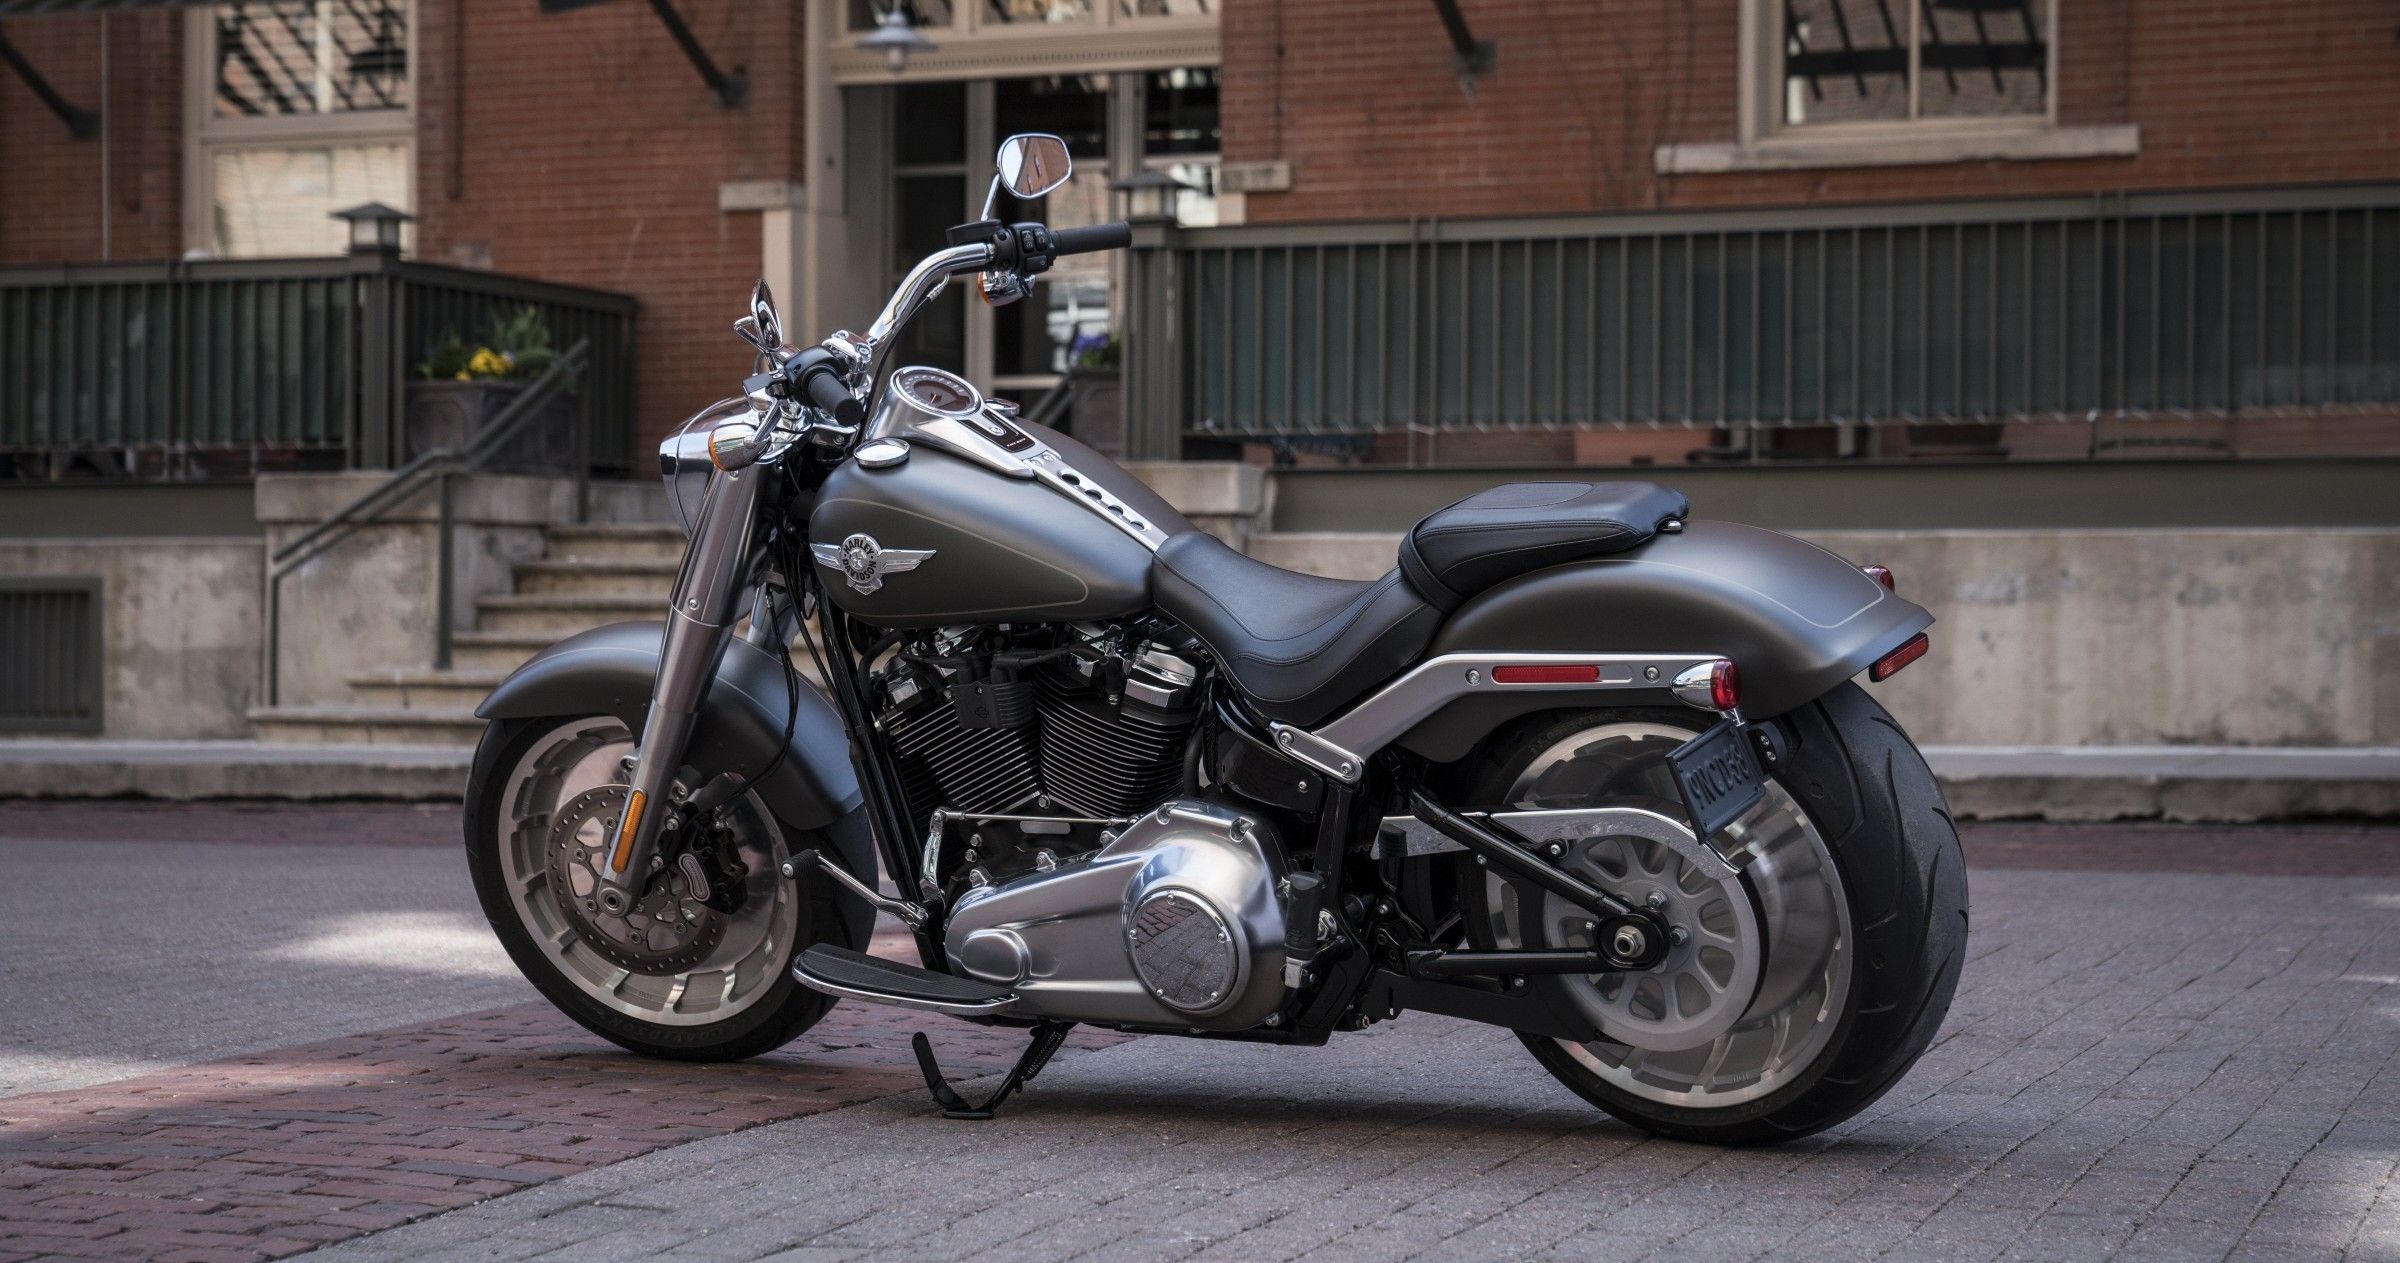 Harley Davidson Fat Bob Vs Fat Boy These Are The Main Differences